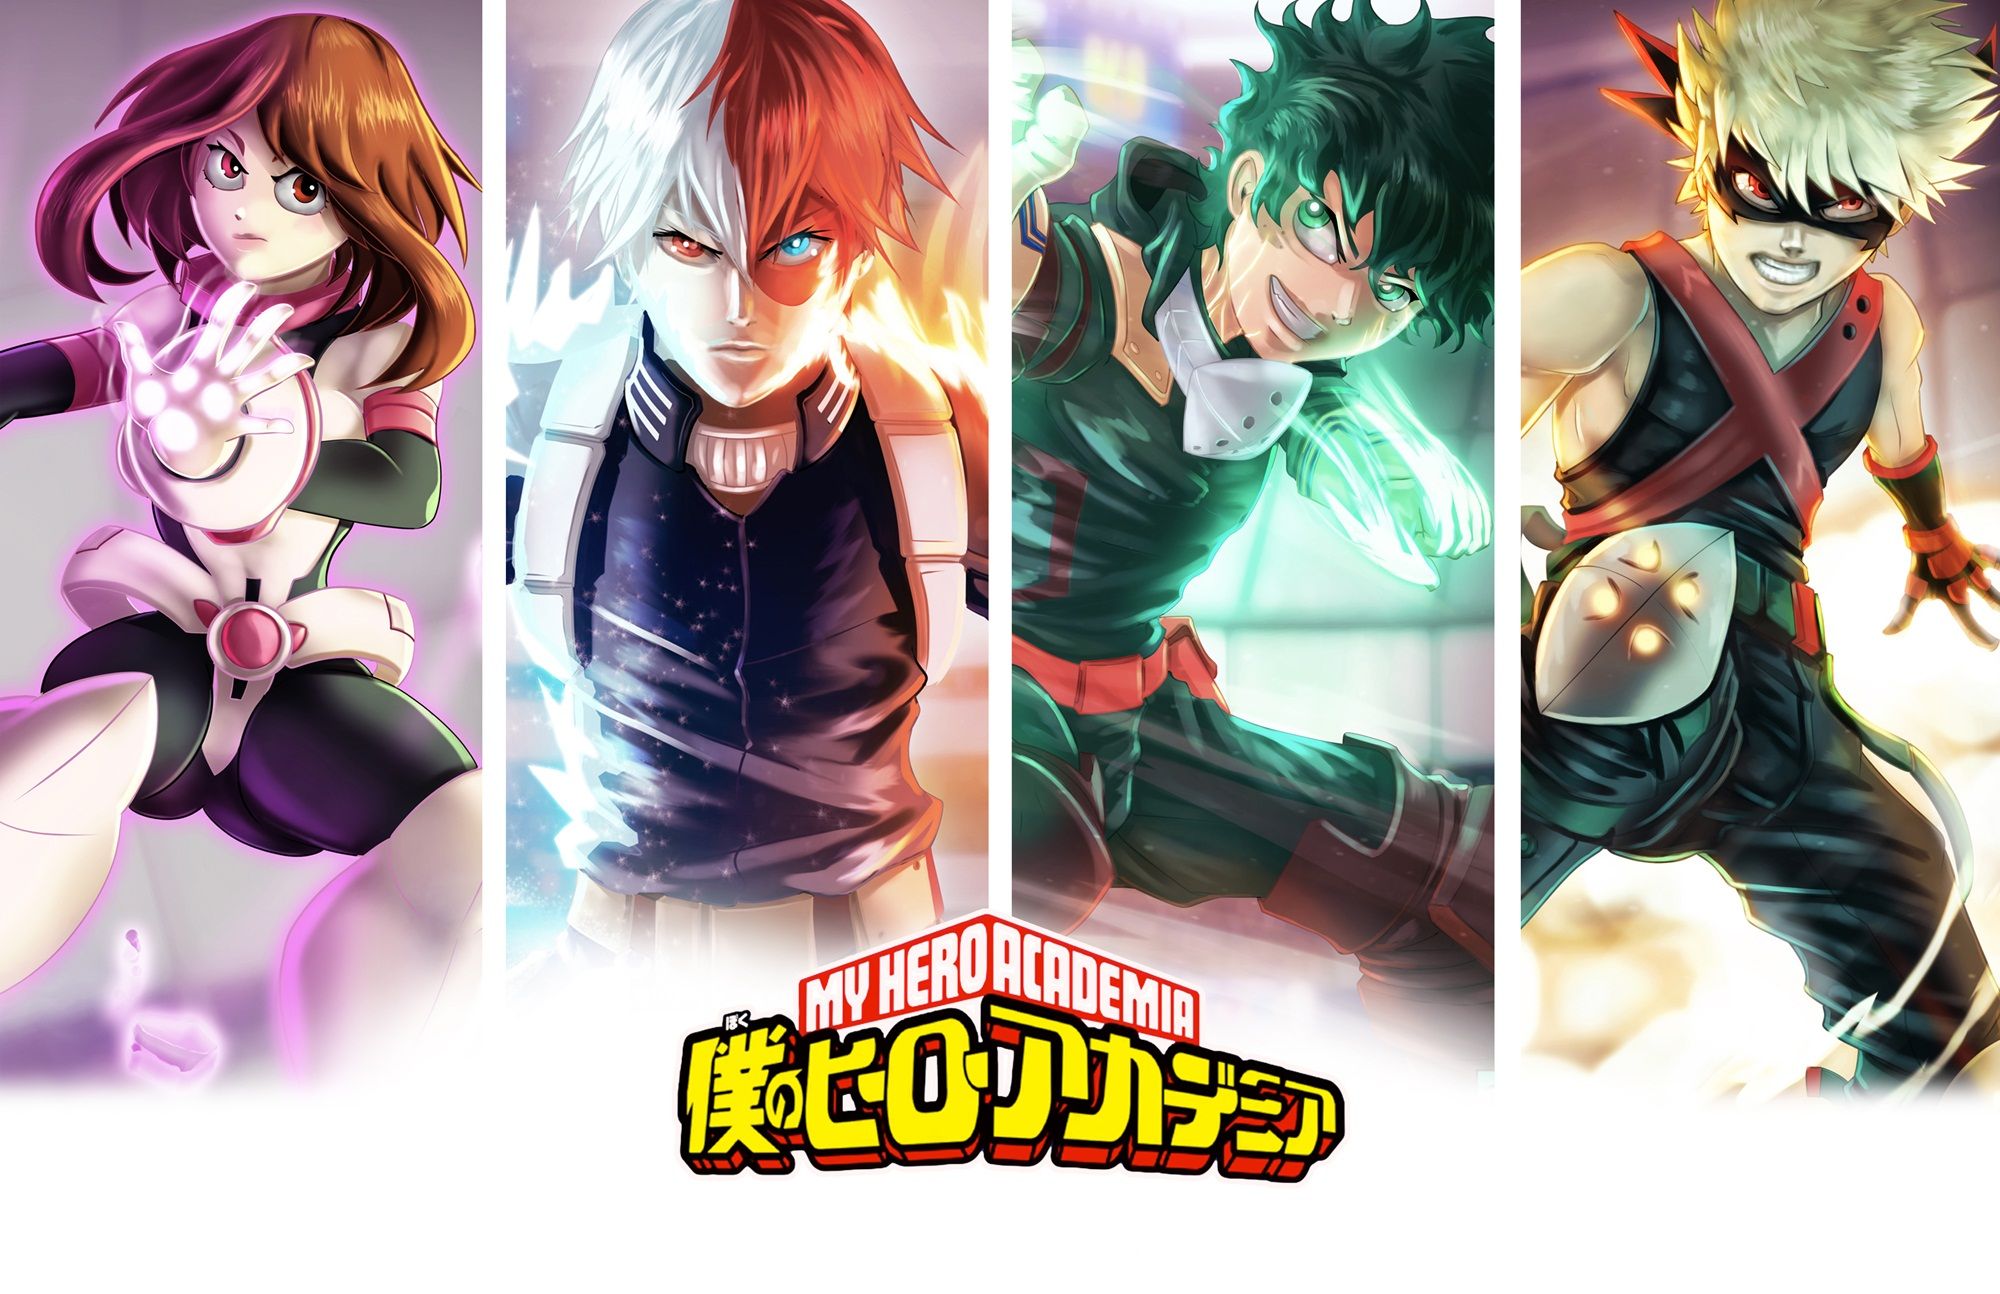 Download wallpaper from anime My Hero Academia with tags: Windows